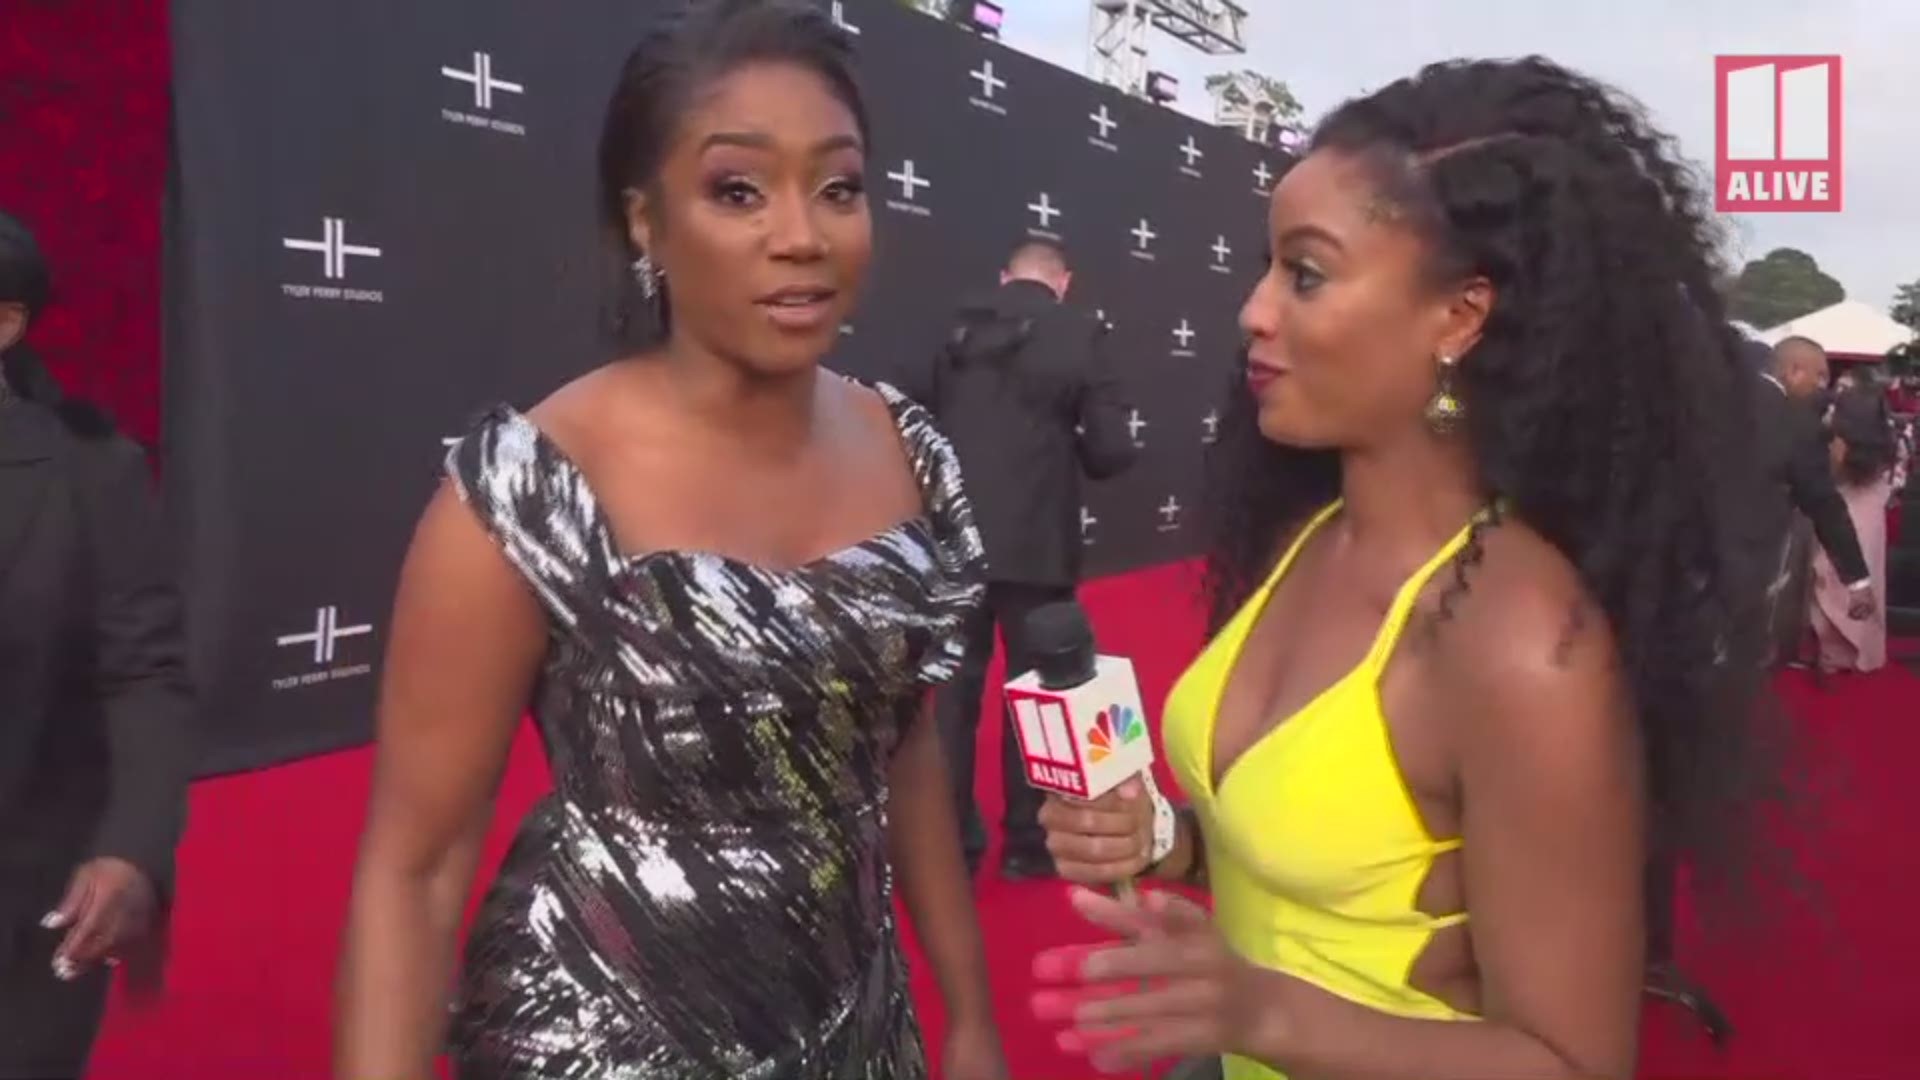 Haddish said of all the many A-list celebrities at the event, the one she was most excited to see was her friend - Tyler Perry himself.